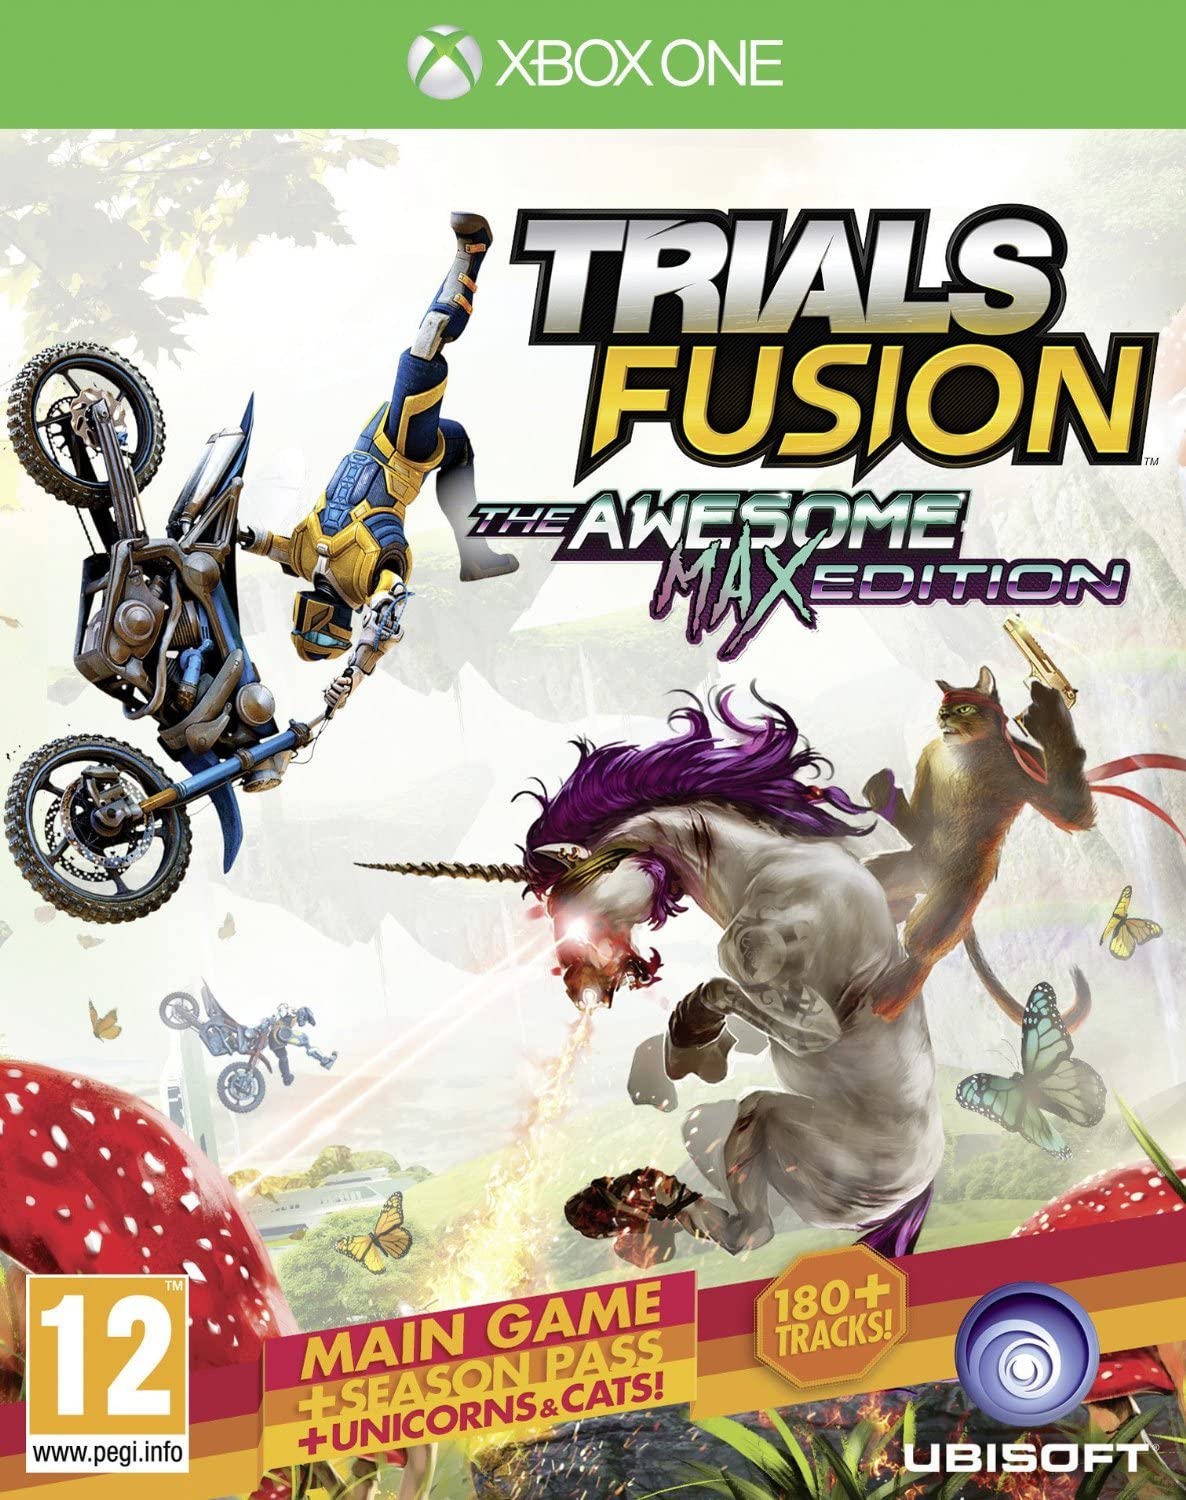 Trials Fusion The Awesome Max Edition Digital Download Key (Xbox One): Europe - 